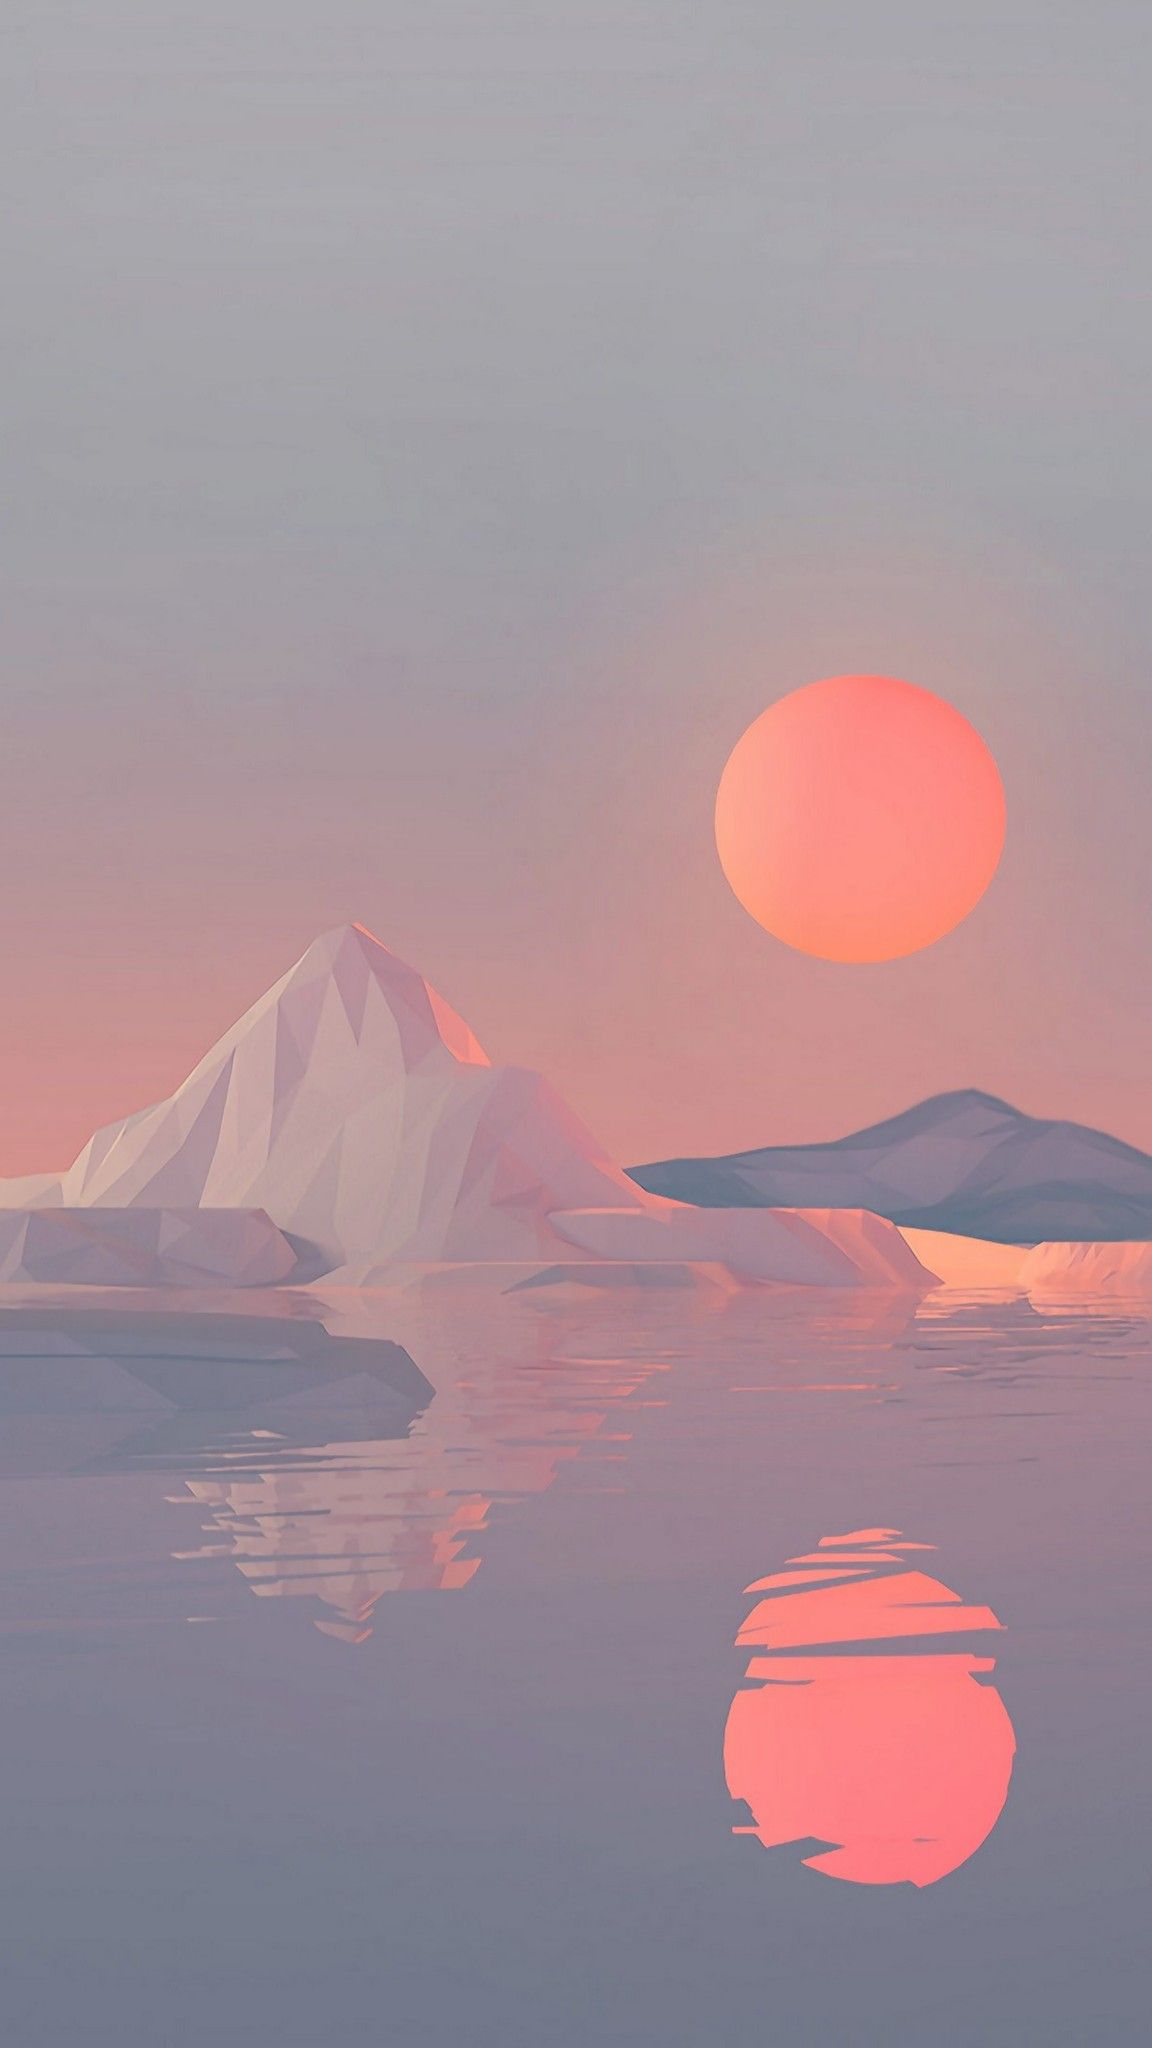 A beautiful minimalistic wallpaper of an iceberg with a sunset in the background - Sunrise